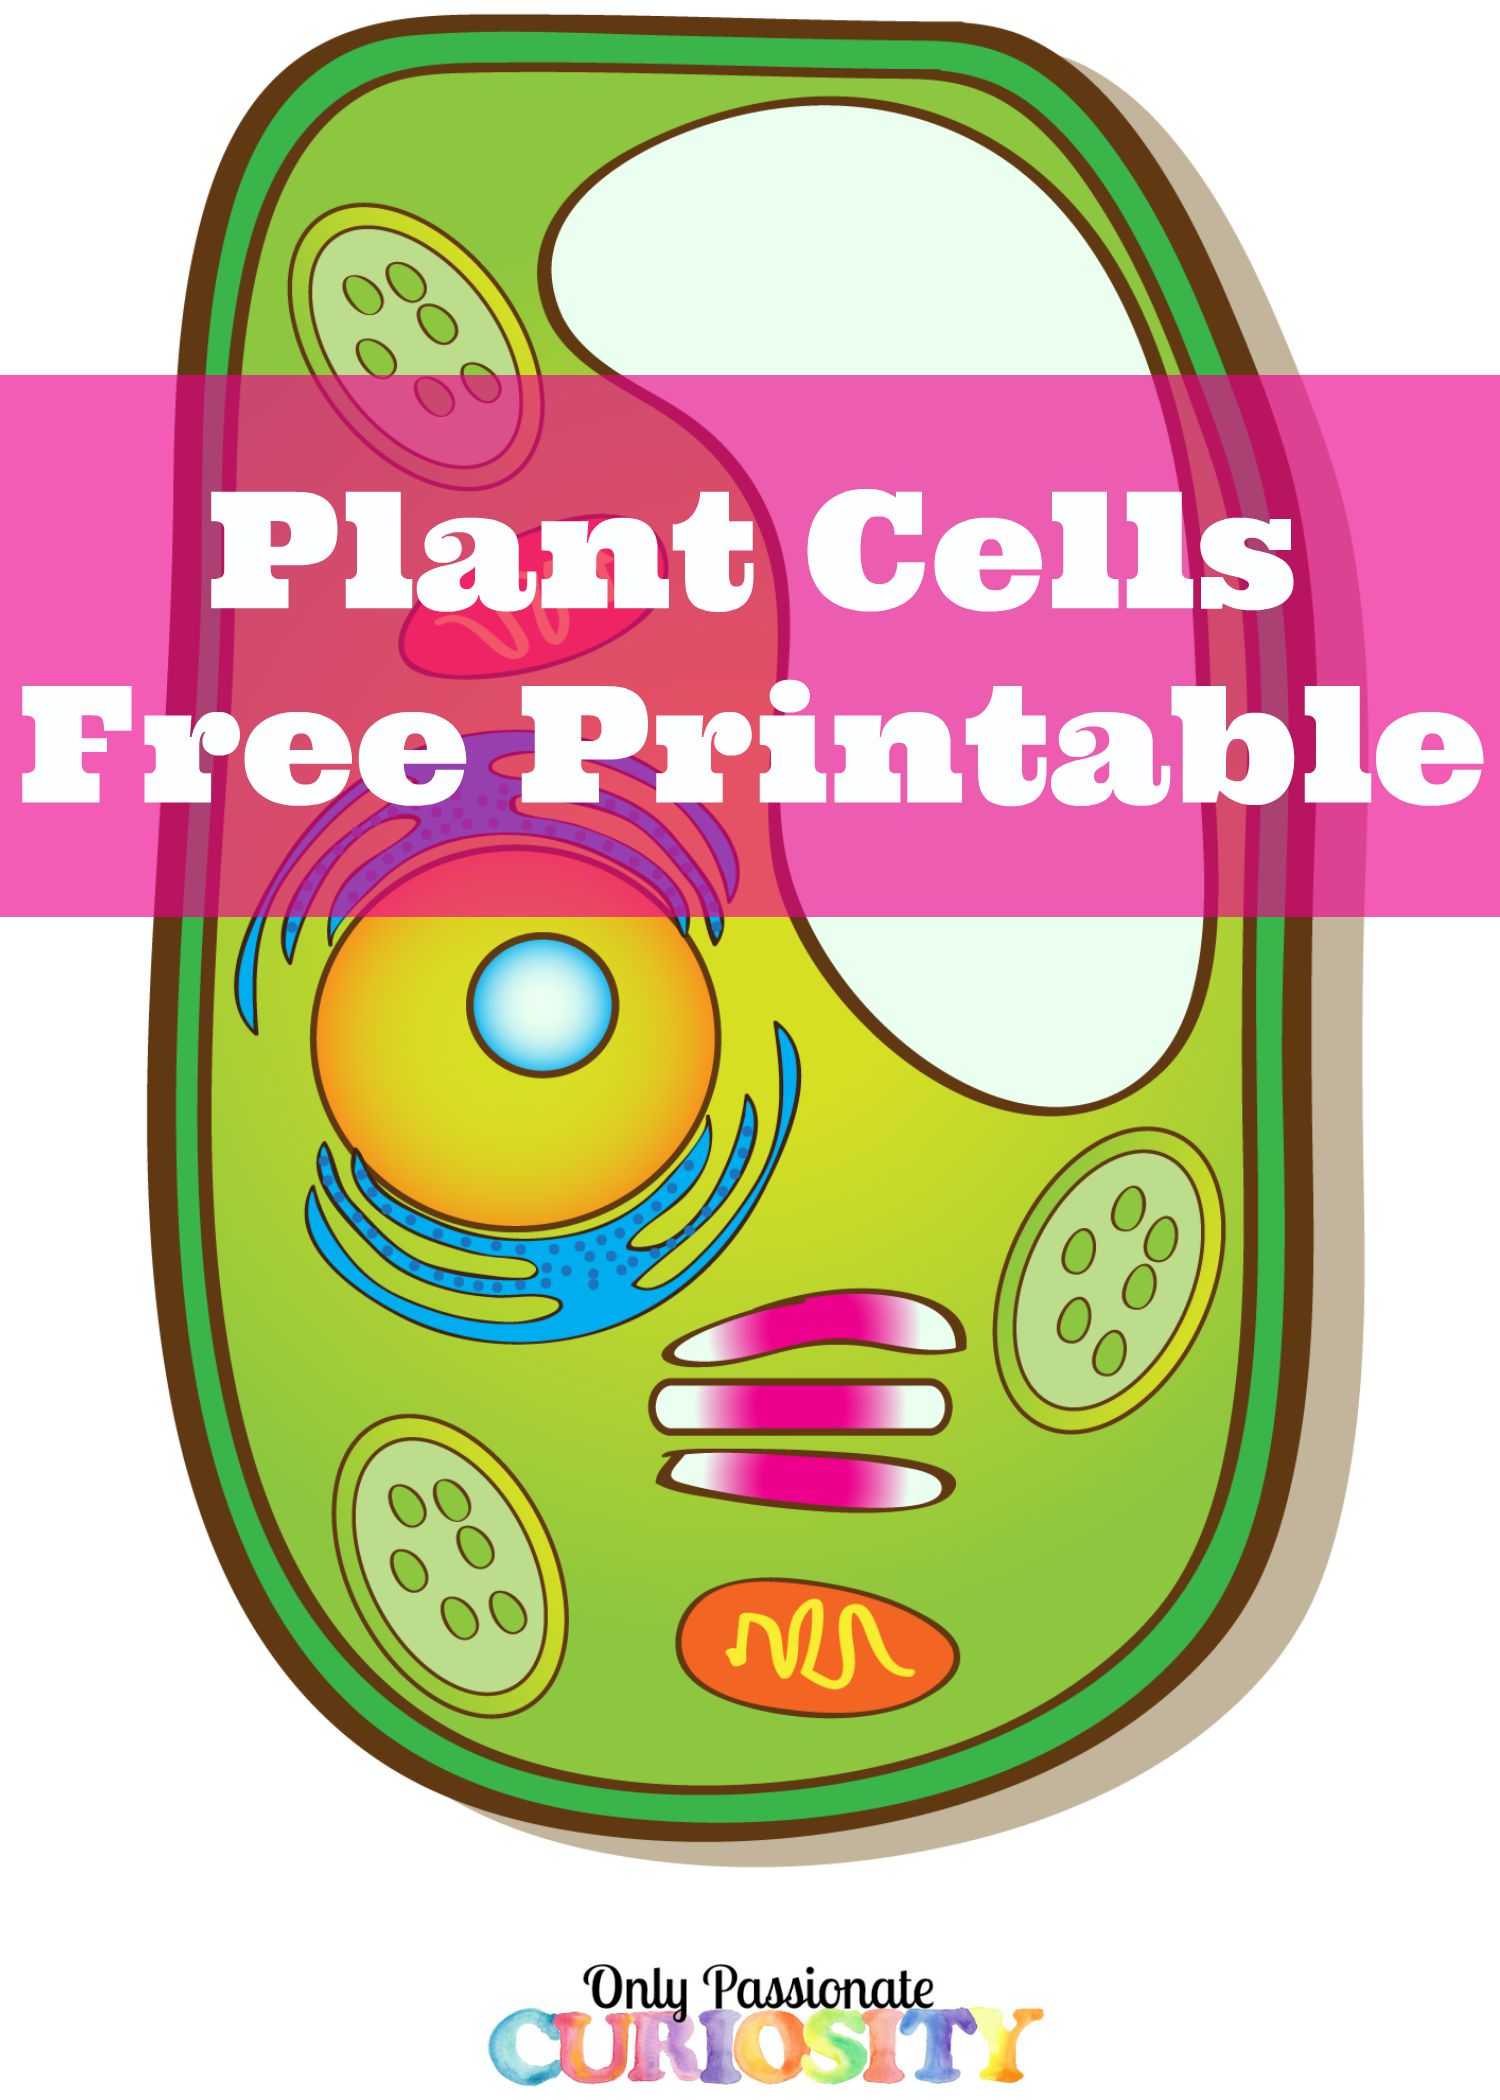 plant-cells-printable-pack-only-passionate-curiosity